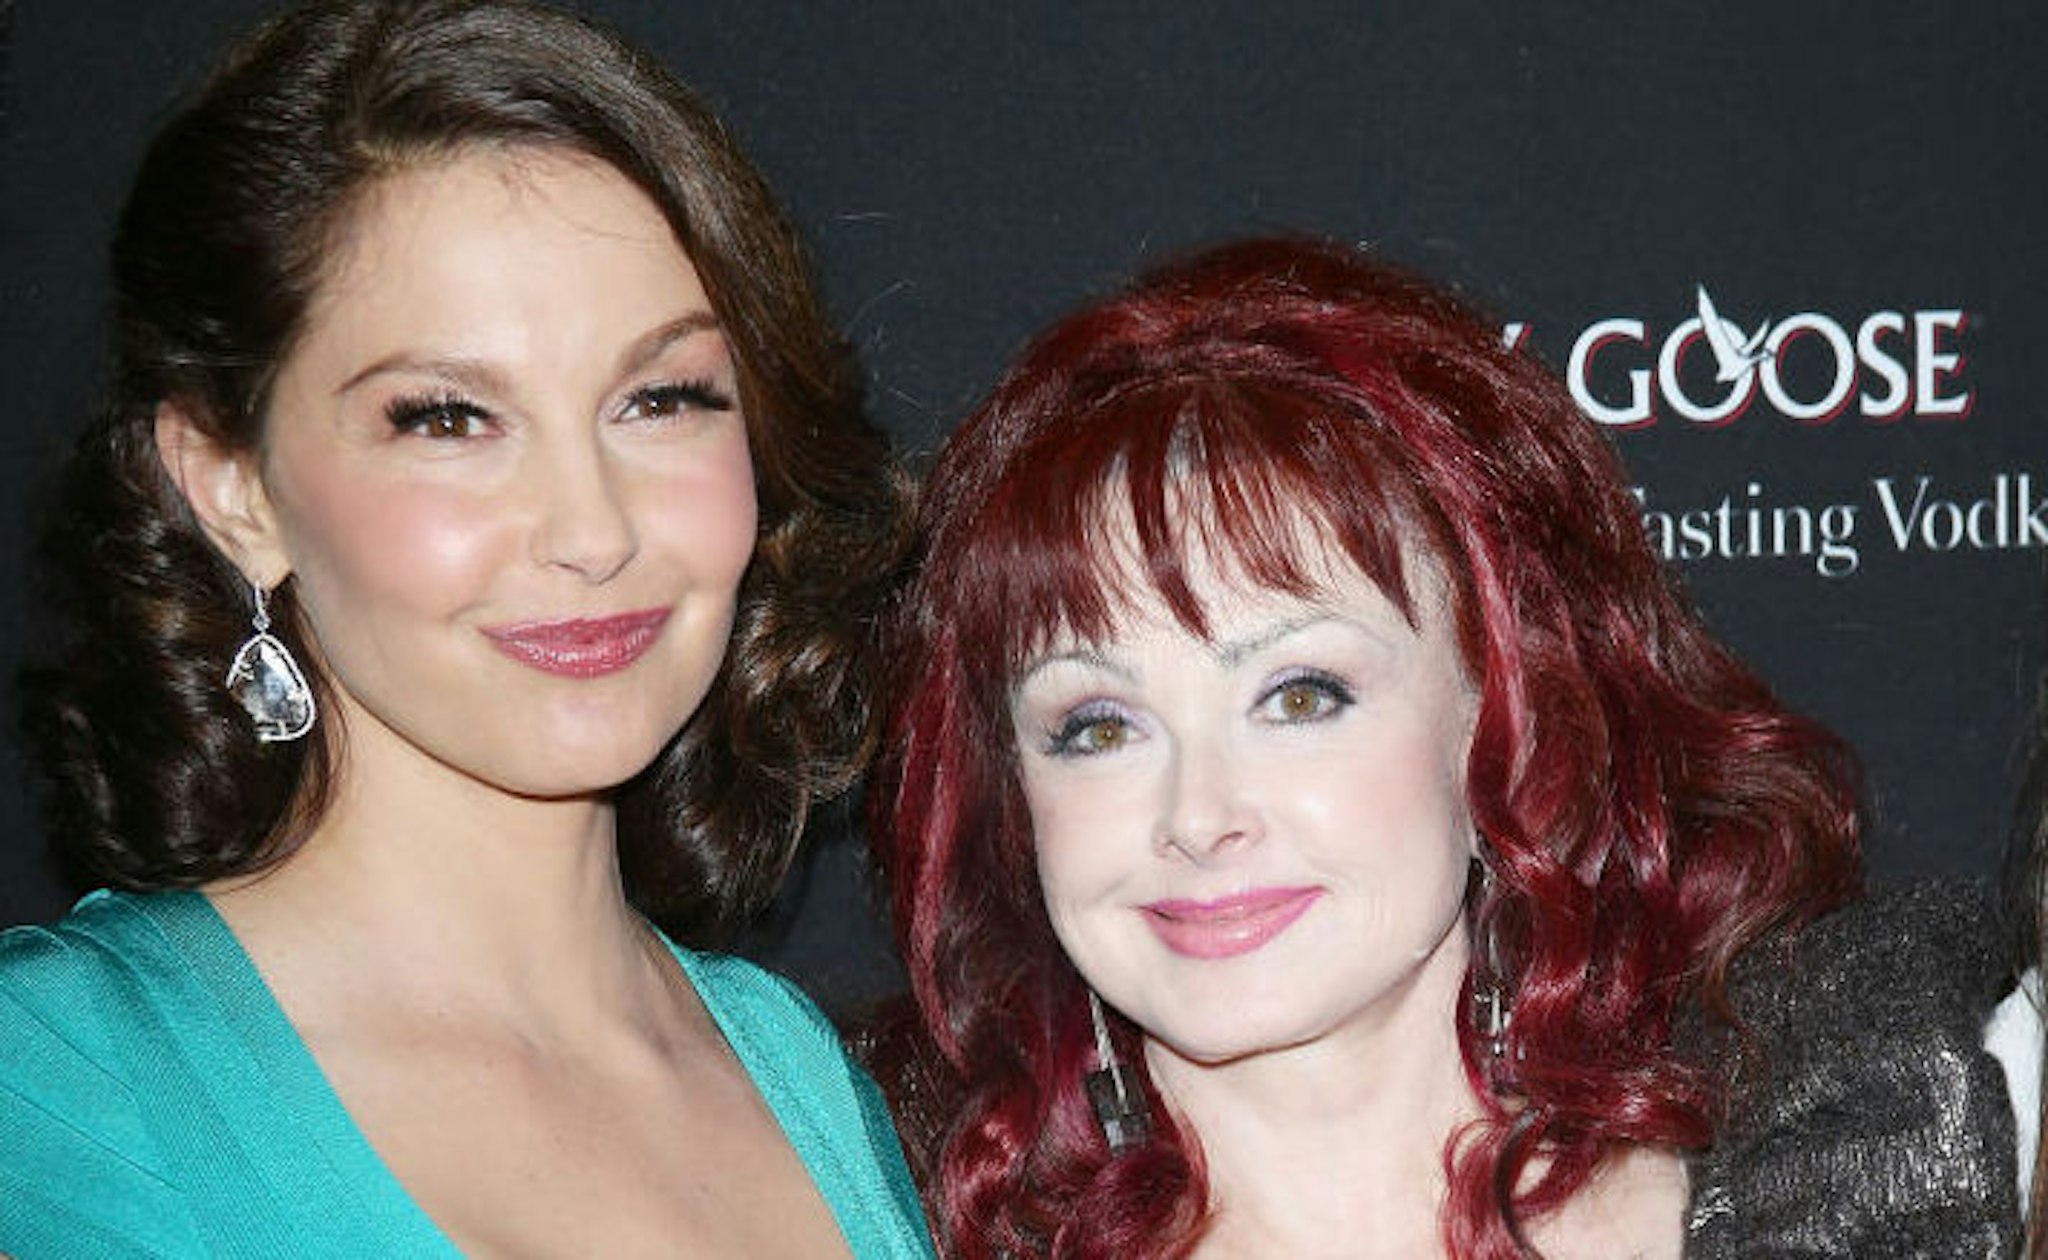 Ashley Judd says she 're-enrolled herself' in therapy after photos